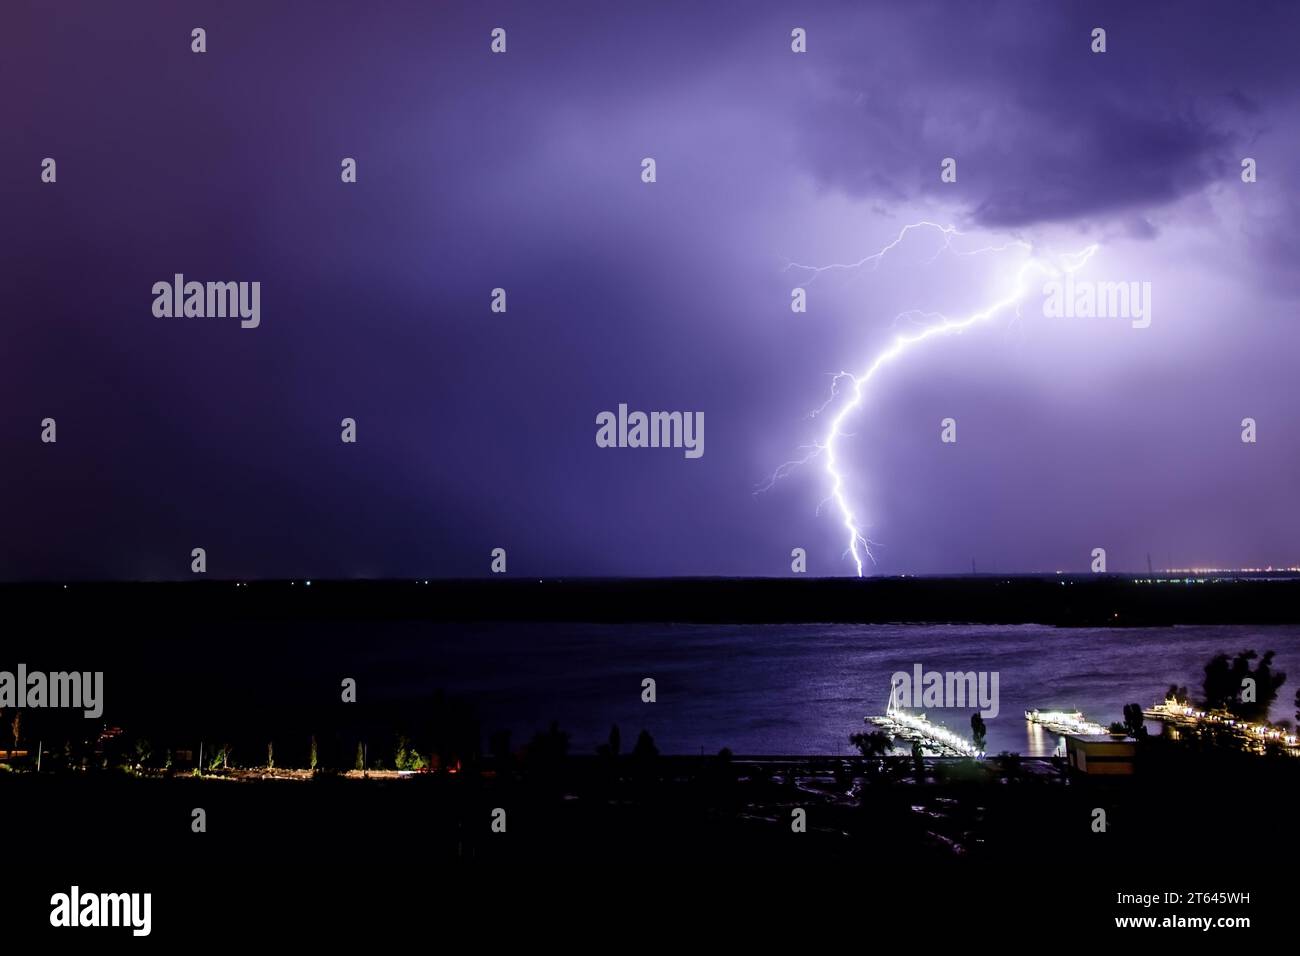 A night storm over the Volga River. Russia Stock Photo